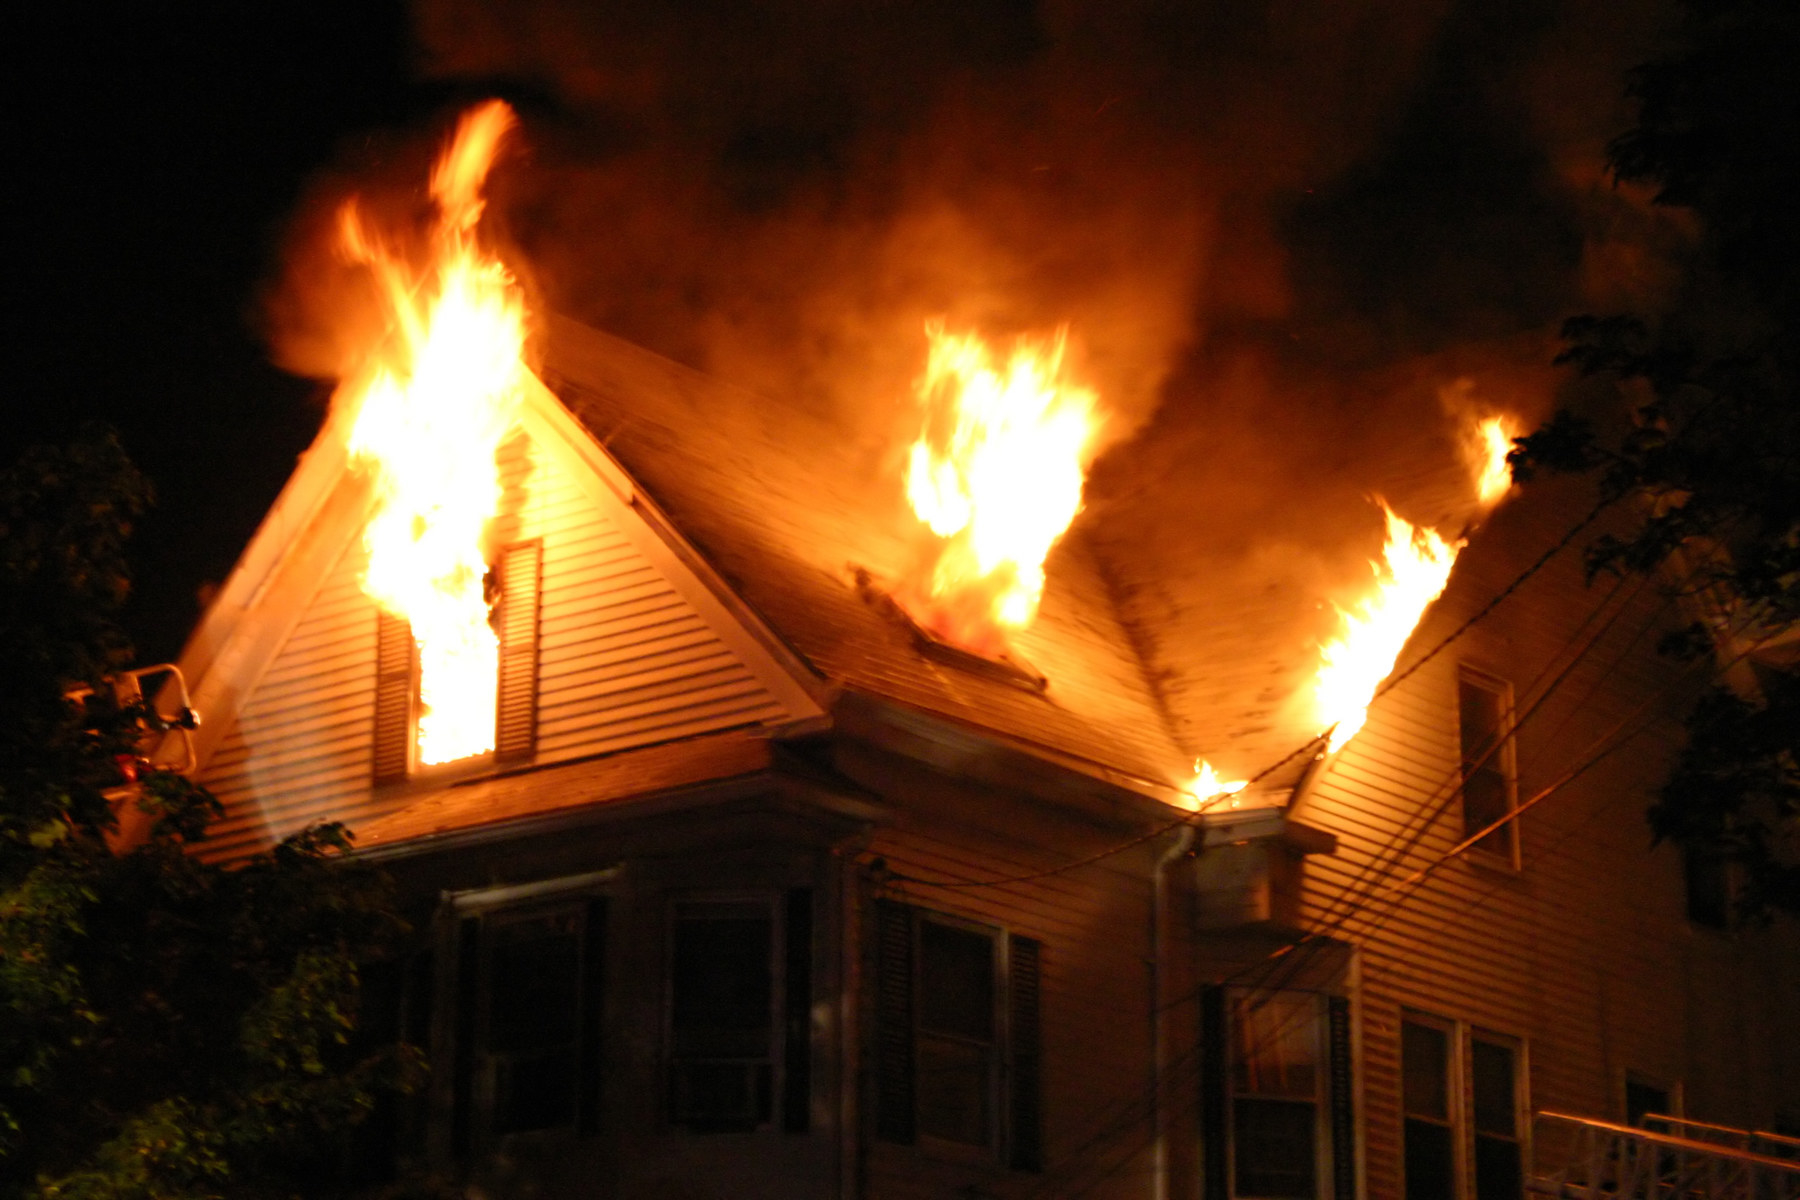 Second story of house on fire